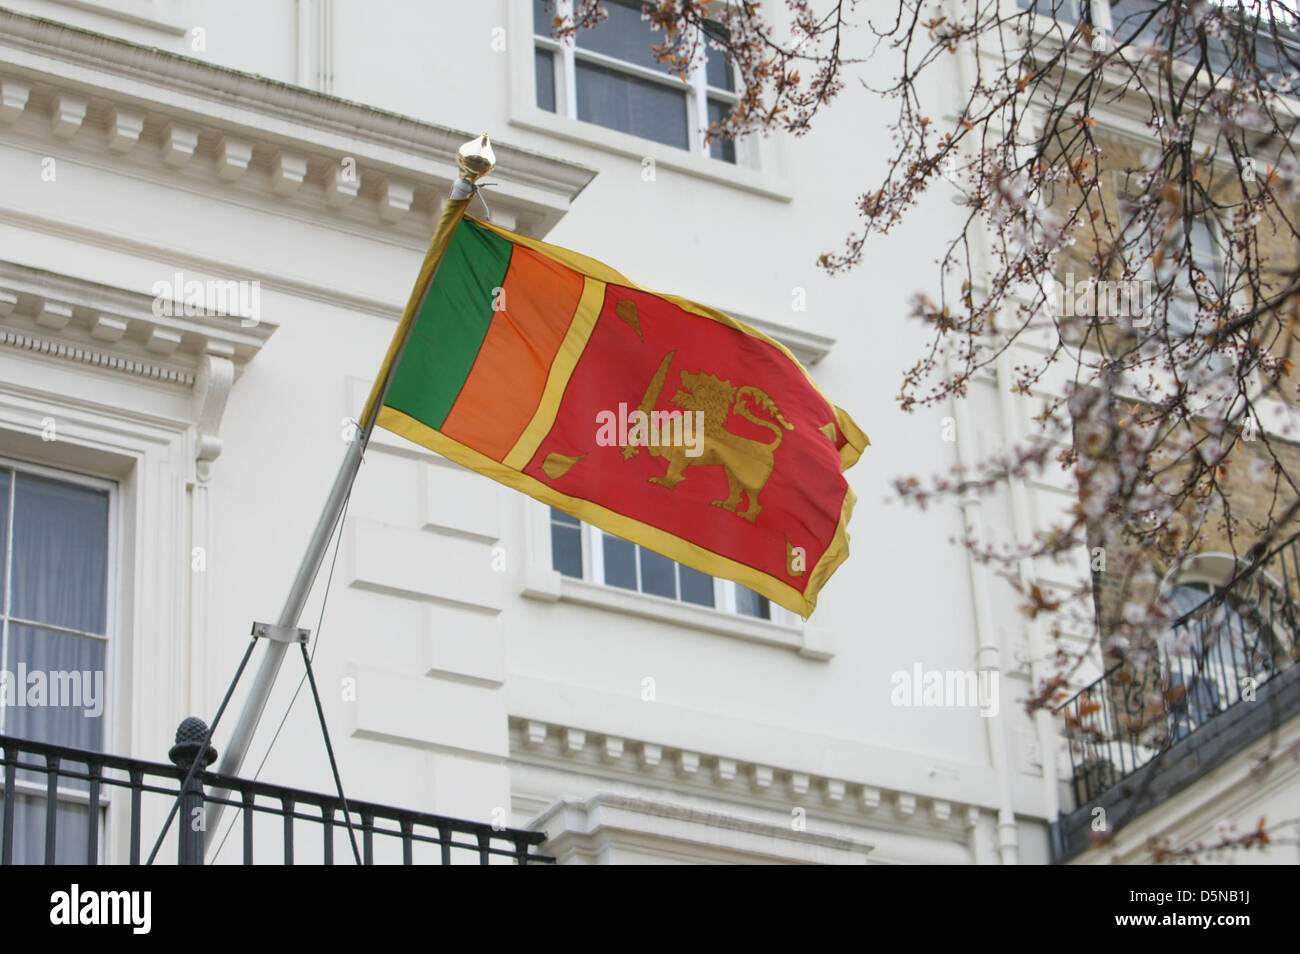 London, UK, 5th April 2013 Sri Lanken flag at Sri Lanken High Commission where Anjem Choudary's muslim group hold demonstration over alleged atrocities committed by Buddhists against Muslims in that country. Stock Photo